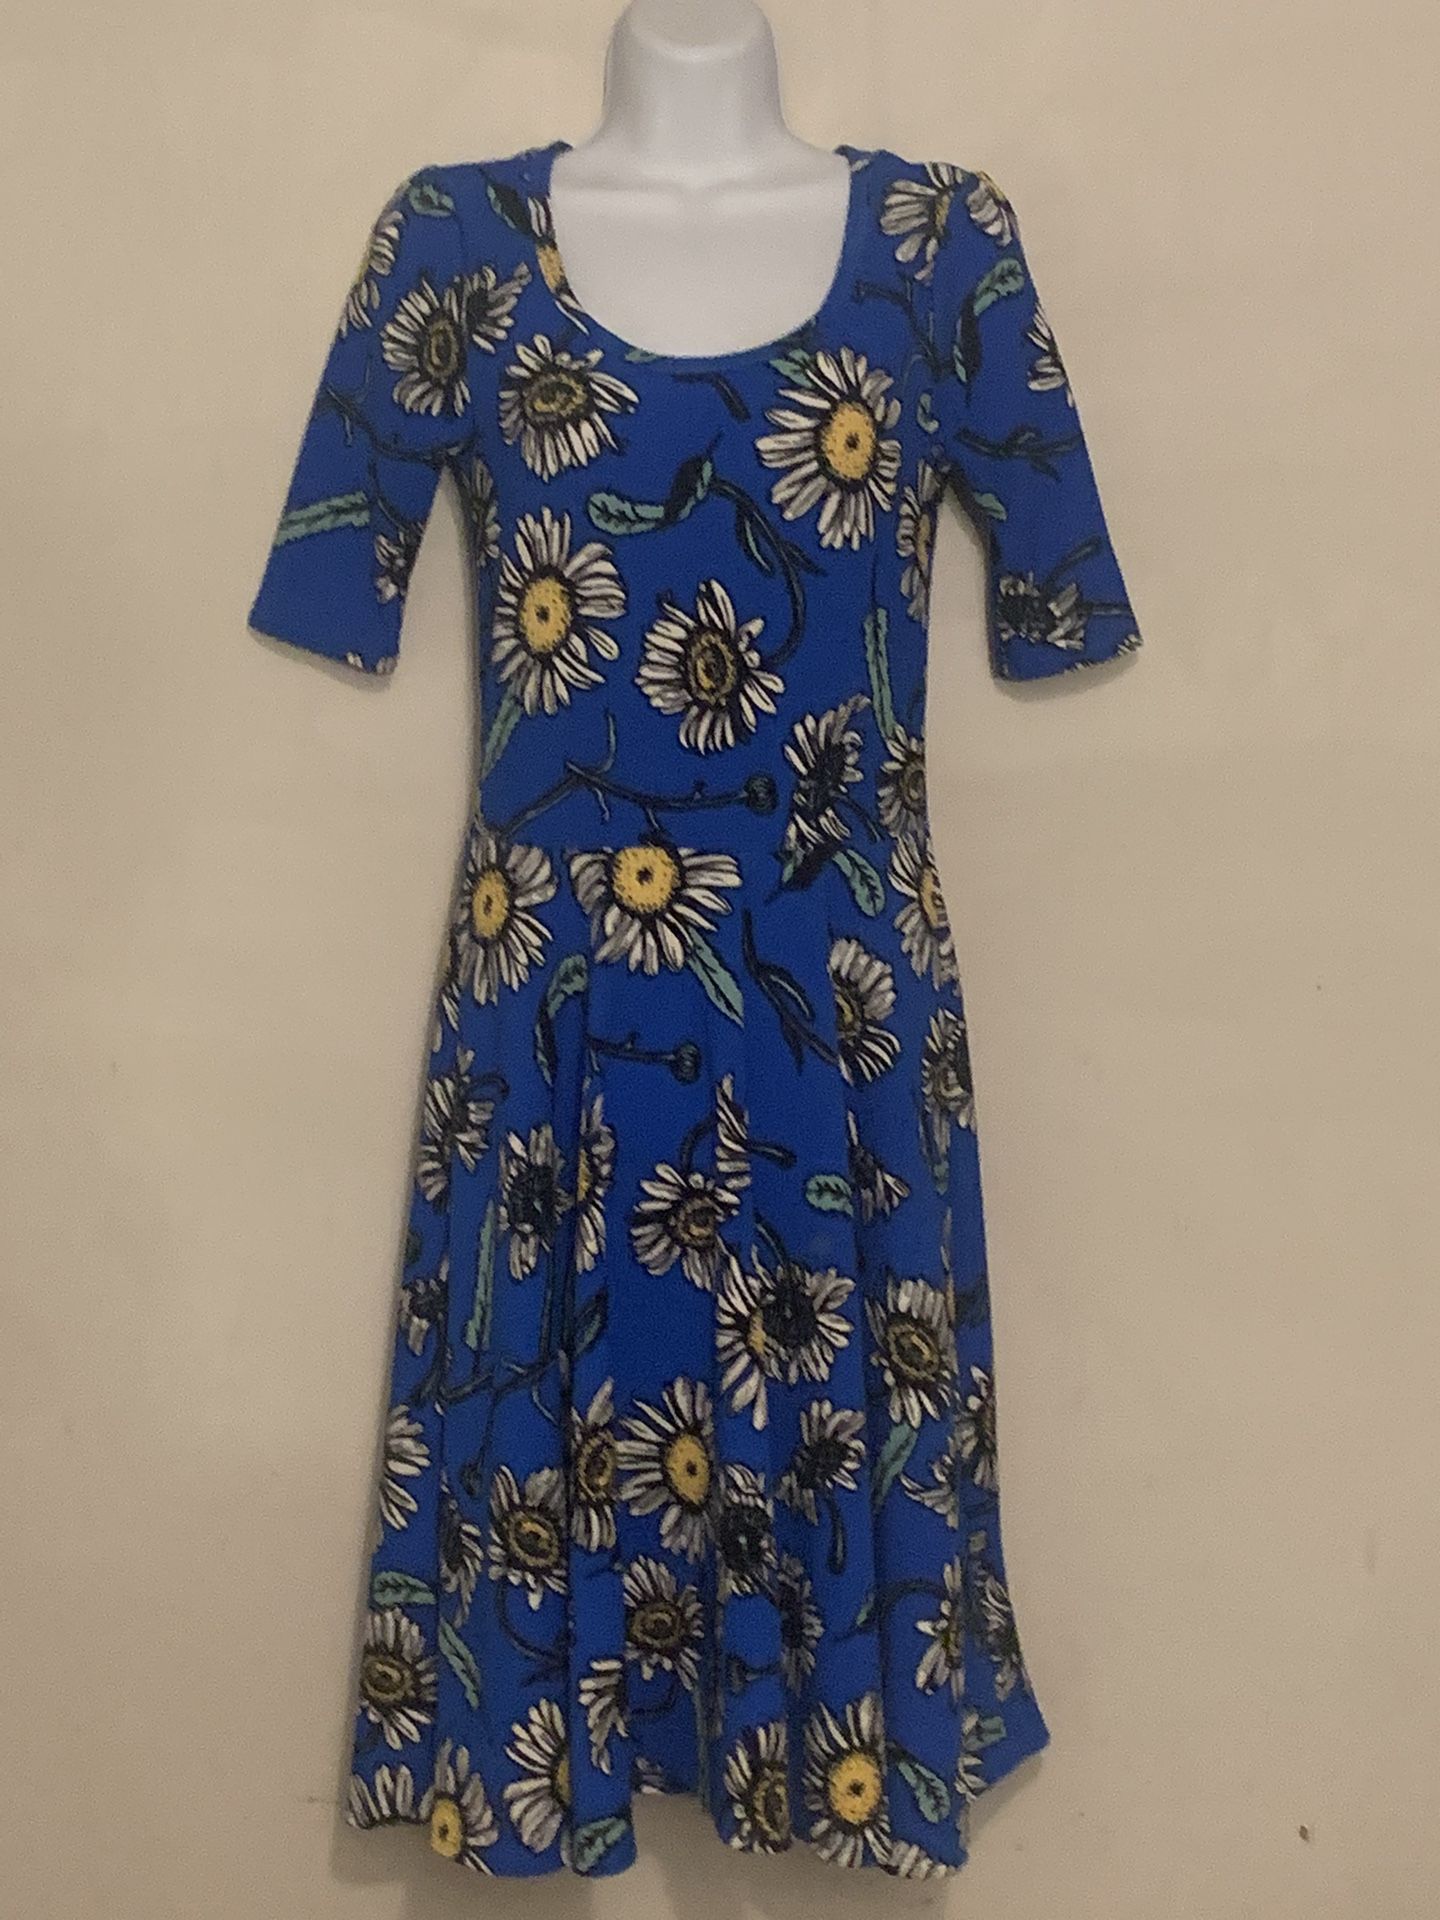 BLUE FLORAL DRESS, NEVER WORN, Perfect Condition!!!   $23